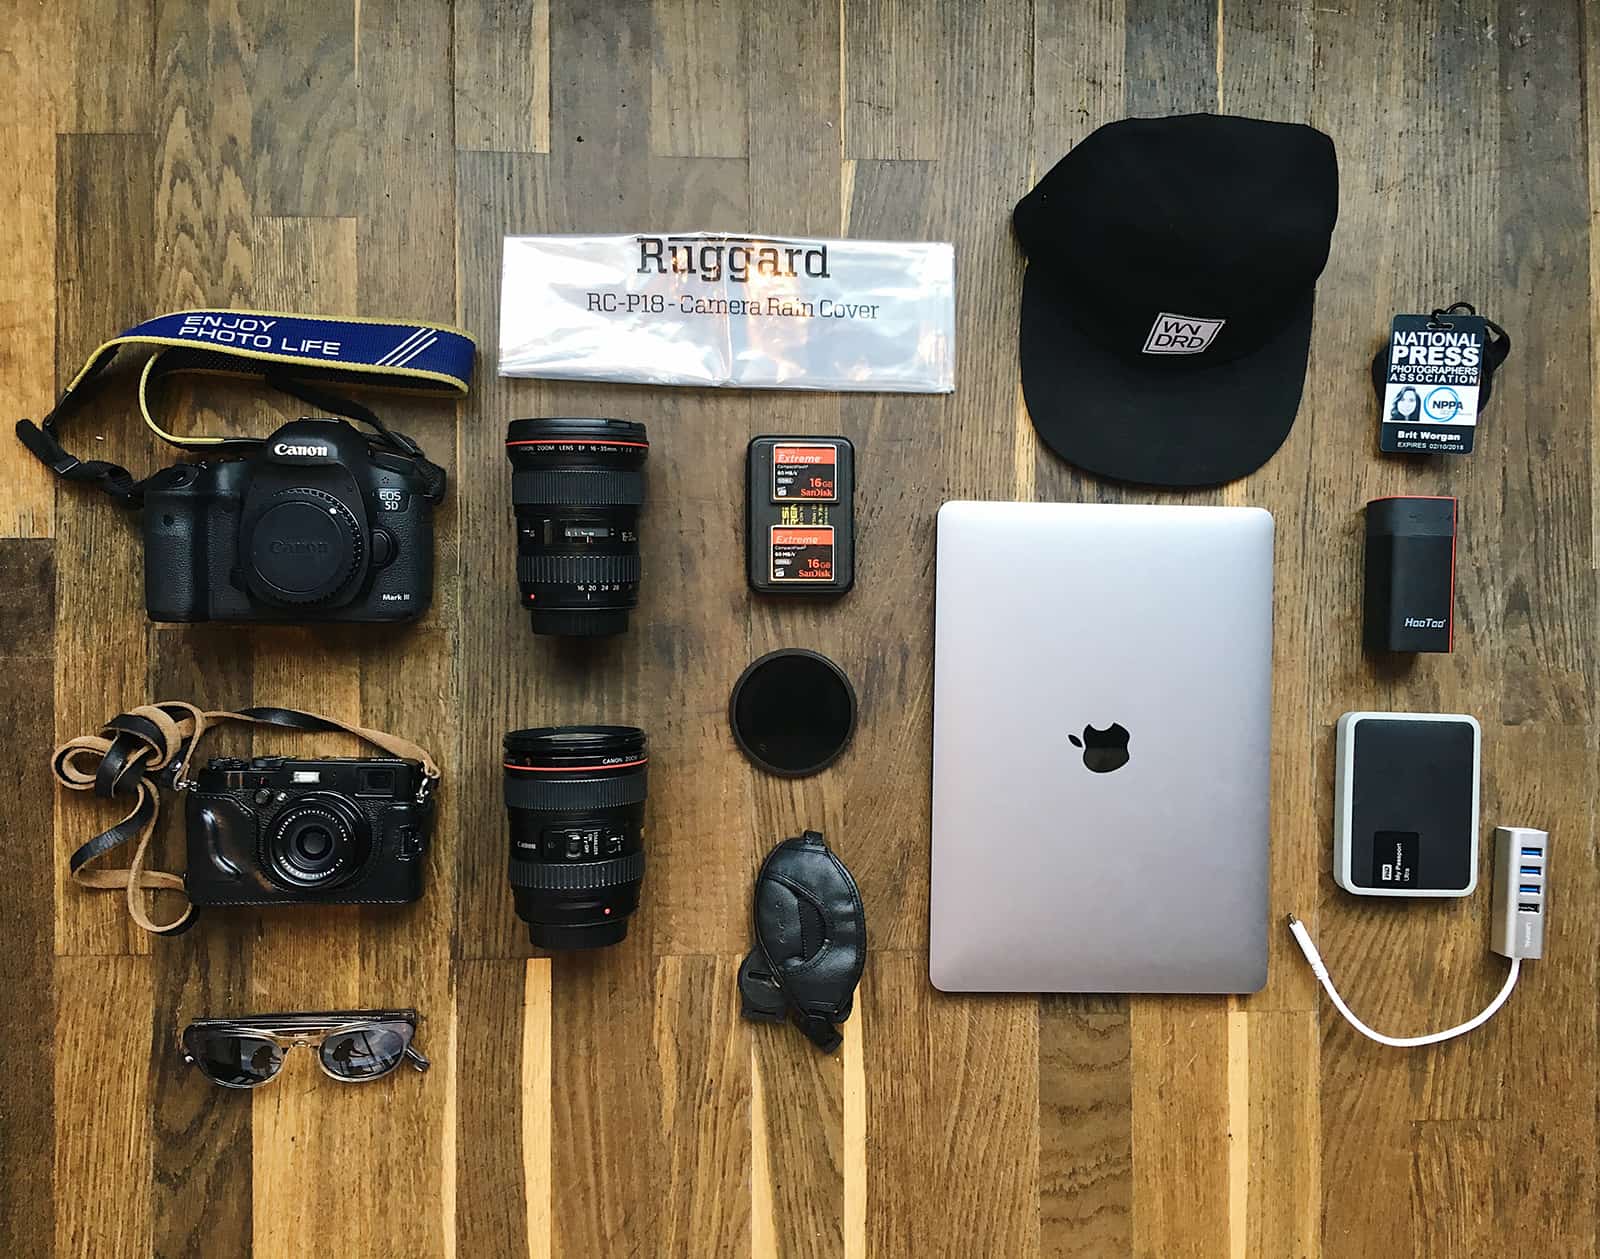 What Does the RedBall Photographer Carry?